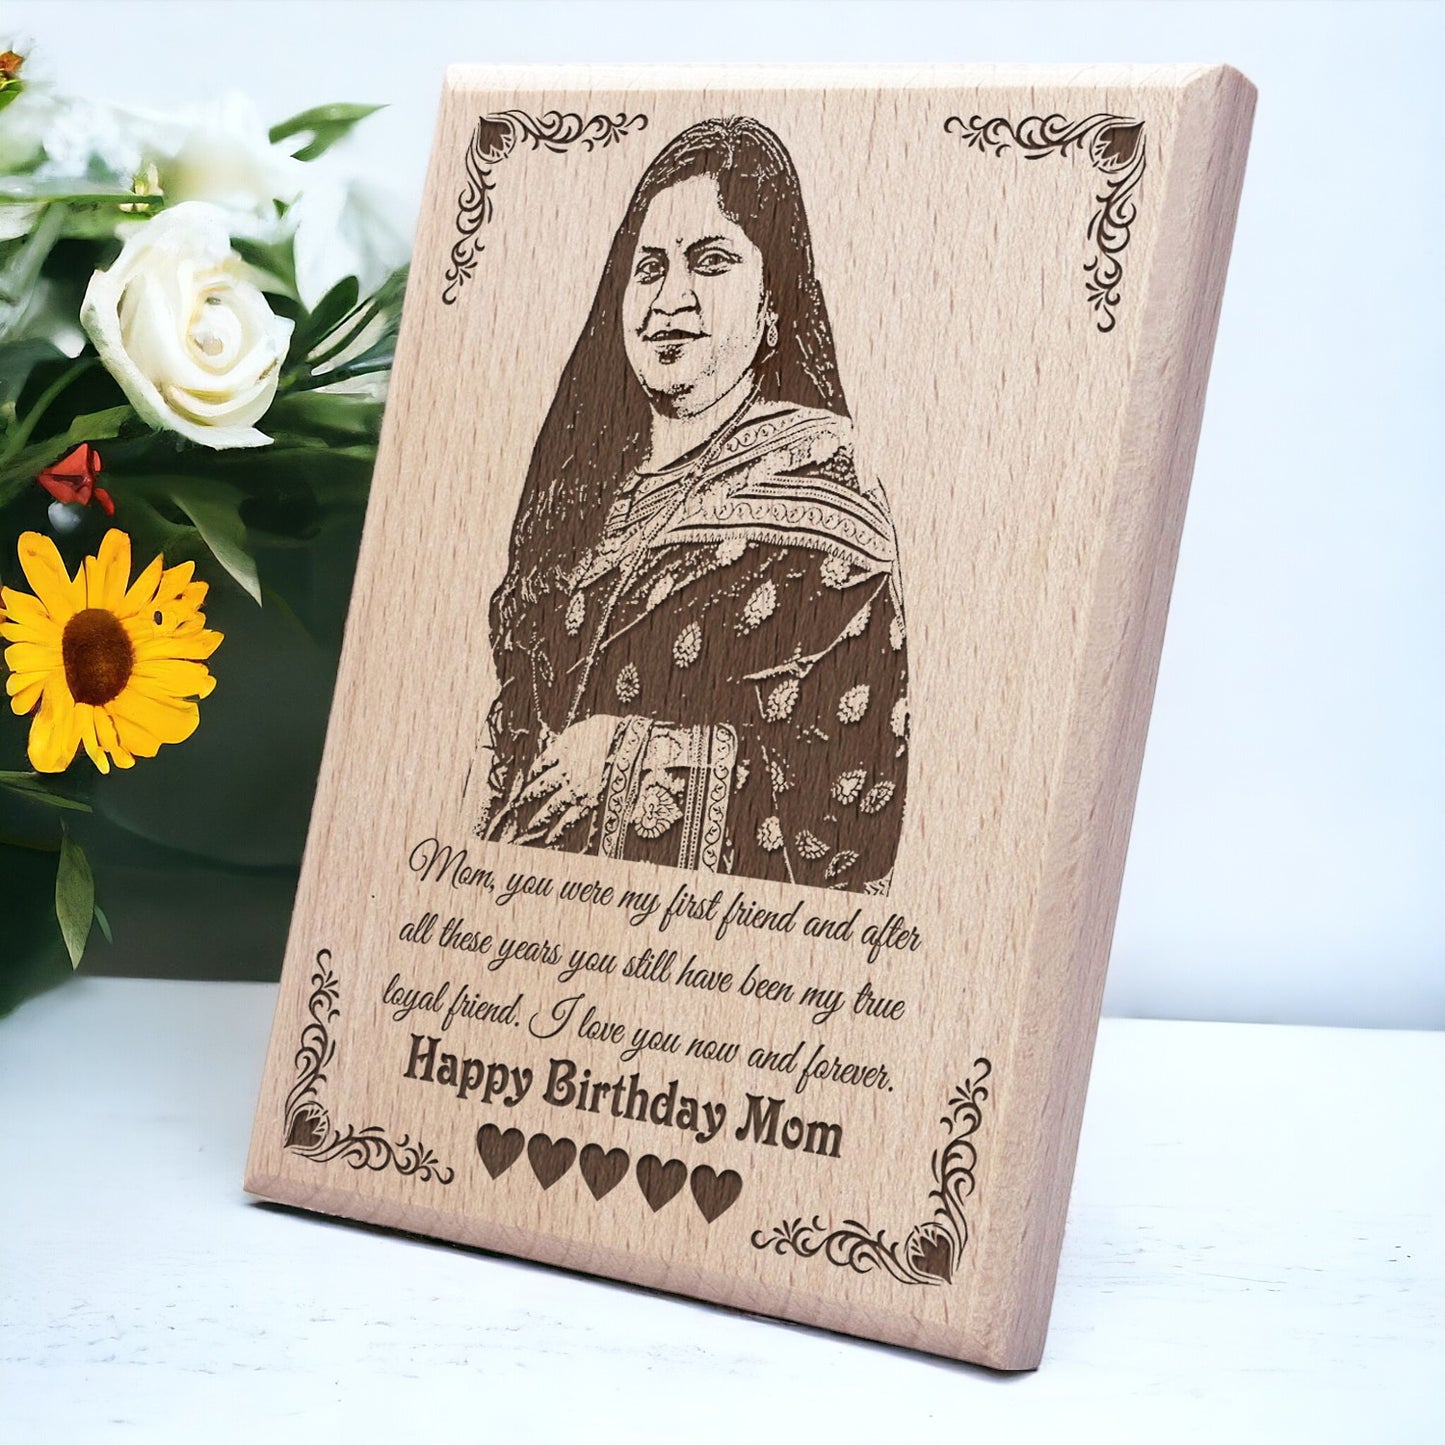 Personalized Wooden Photo Frame Birthday Surprise For Mom